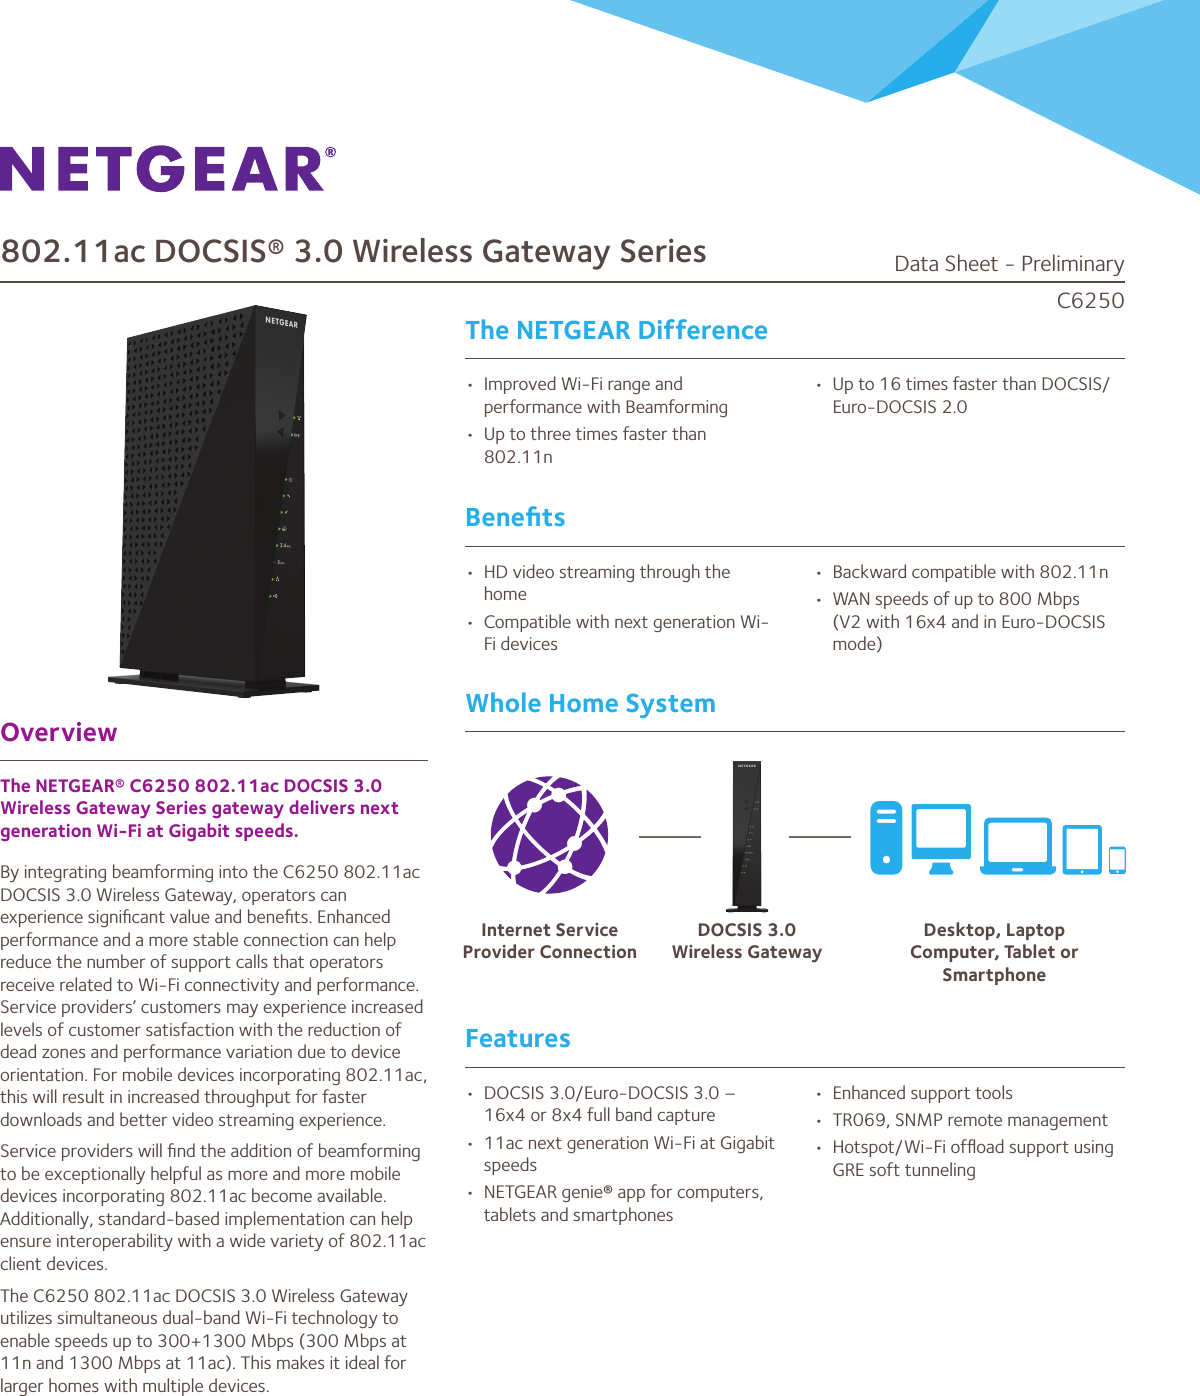 802.11ac DOCSIS® 3.0 Wireless Gateway Series                                                   The NETGEAR DifferenceBeneﬁtsFeaturesWhole Home SystemOverviewThe NETGEAR® C6250 802.11ac DOCSIS 3.0 Wireless Gateway Series gateway delivers next generation Wi-Fi at Gigabit speeds.By integrating beamforming into the C6250 802.11ac DOCSIS 3.0 Wireless Gateway, operators can experience signiﬁcant value and beneﬁts. Enhanced performance and a more stable connection can help reduce the number of support calls that operators receive related to Wi-Fi connectivity and performance. Service providers’ customers may experience increased levels of customer satisfaction with the reduction of dead zones and performance variation due to device orientation. For mobile devices incorporating 802.11ac, this will result in increased throughput for faster downloads and better video streaming experience.Service providers will ﬁnd the addition of beamforming to be exceptionally helpful as more and more mobile devices incorporating 802.11ac become available. Additionally, standard-based implementation can help ensure interoperability with a wide variety of 802.11ac client devices.The C6250 802.11ac DOCSIS 3.0 Wireless Gateway utilizes simultaneous dual-band Wi-Fi technology to enable speeds up to 300+1300 Mbps (300 Mbps at 11n and 1300 Mbps at 11ac). This makes it ideal for larger homes with multiple devices.•  Improved Wi-Fi range and performance with Beamforming•  Up to three times faster than 802.11n•  Up to 16 times faster than DOCSIS/Euro-DOCSIS 2.0•  HD video streaming through the home•  Compatible with next generation Wi-Fi devices•  Backward compatible with 802.11n•  WAN speeds of up to 800 Mbps (V2 with 16x4 and in Euro-DOCSIS mode)•  DOCSIS 3.0/Euro-DOCSIS 3.0 – 16x4 or 8x4 full band capture•  11ac next generation Wi-Fi at Gigabit speeds•  NETGEAR genie® app for computers, tablets and smartphones•  Enhanced support tools•  TR069, SNMP remote management•  Hotspot/Wi-Fi ofﬂoad support using GRE soft tunnelingC6250Internet Service Provider ConnectionDOCSIS 3.0Wireless GatewayDesktop, Laptop Computer, Tablet or SmartphoneData Sheet - Preliminary